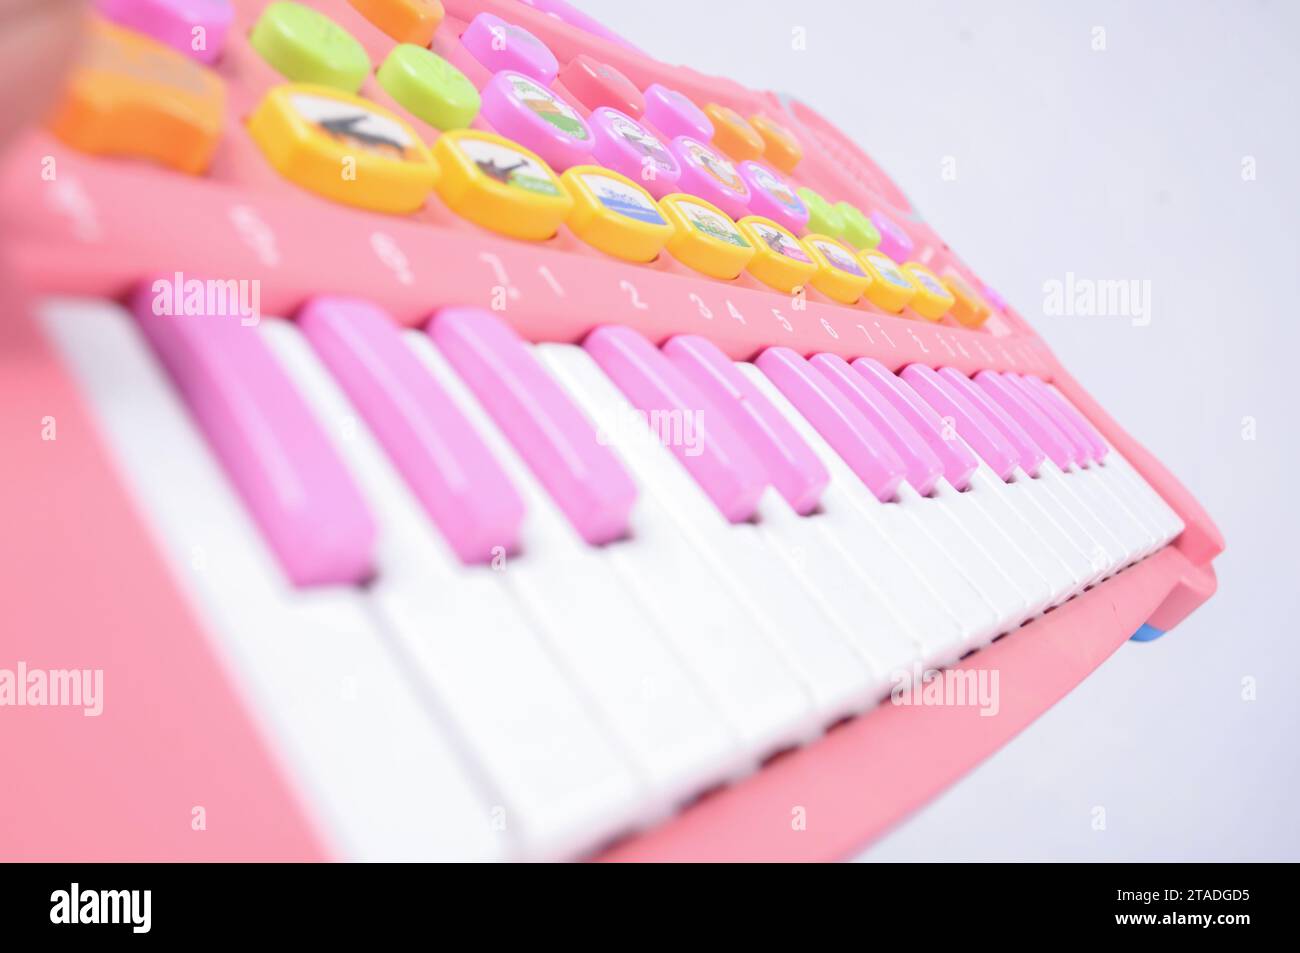 A close-up view of a pink children s toy piano with neatly lined keys and an isolated background Stock Photo